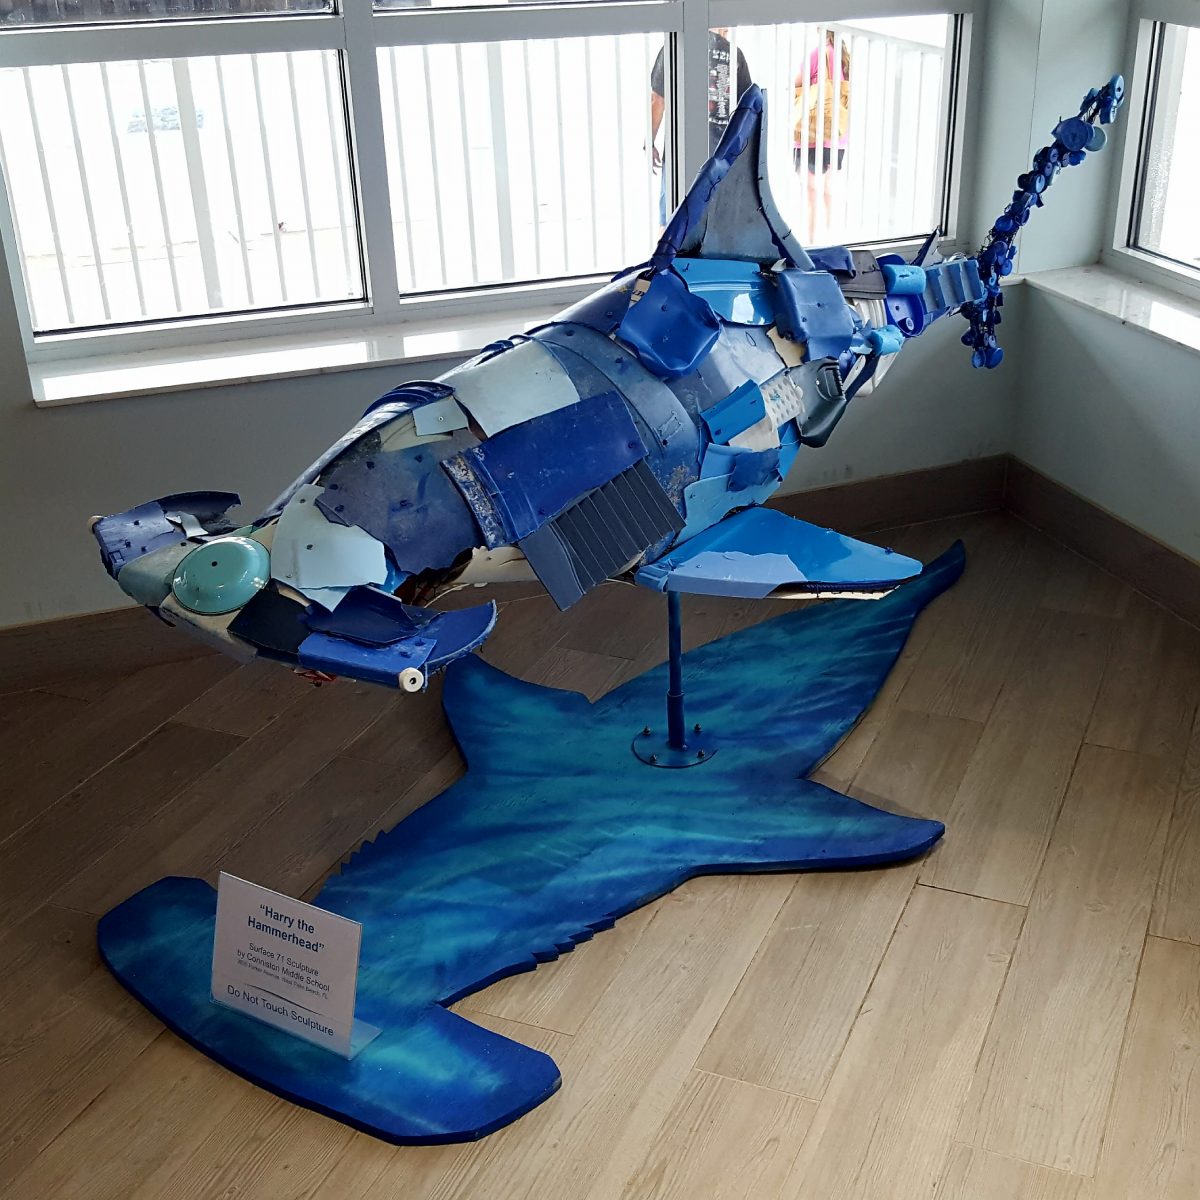 Sculpture made out of marine debris